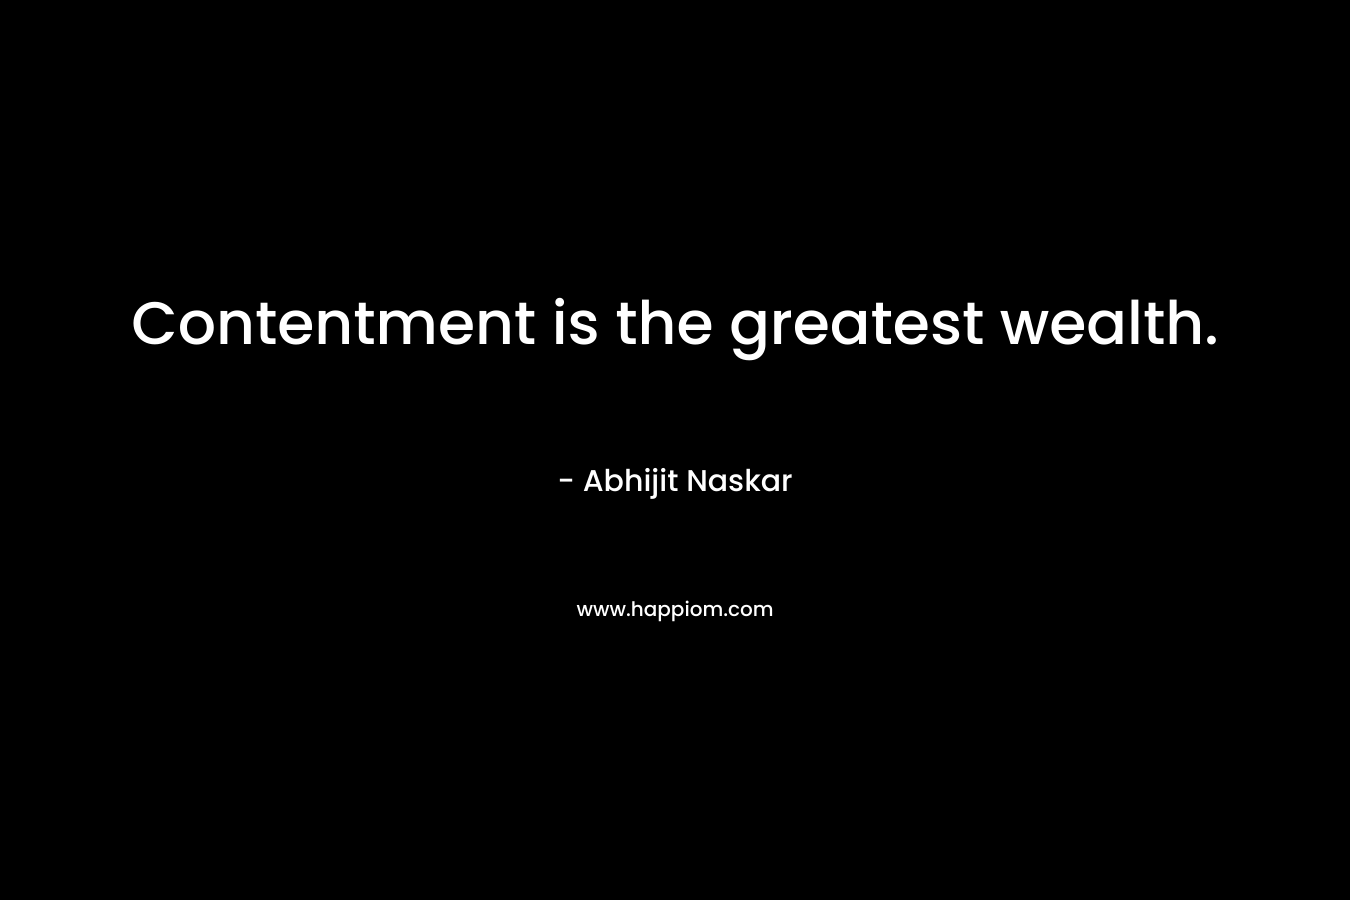 Contentment is the greatest wealth. – Abhijit Naskar